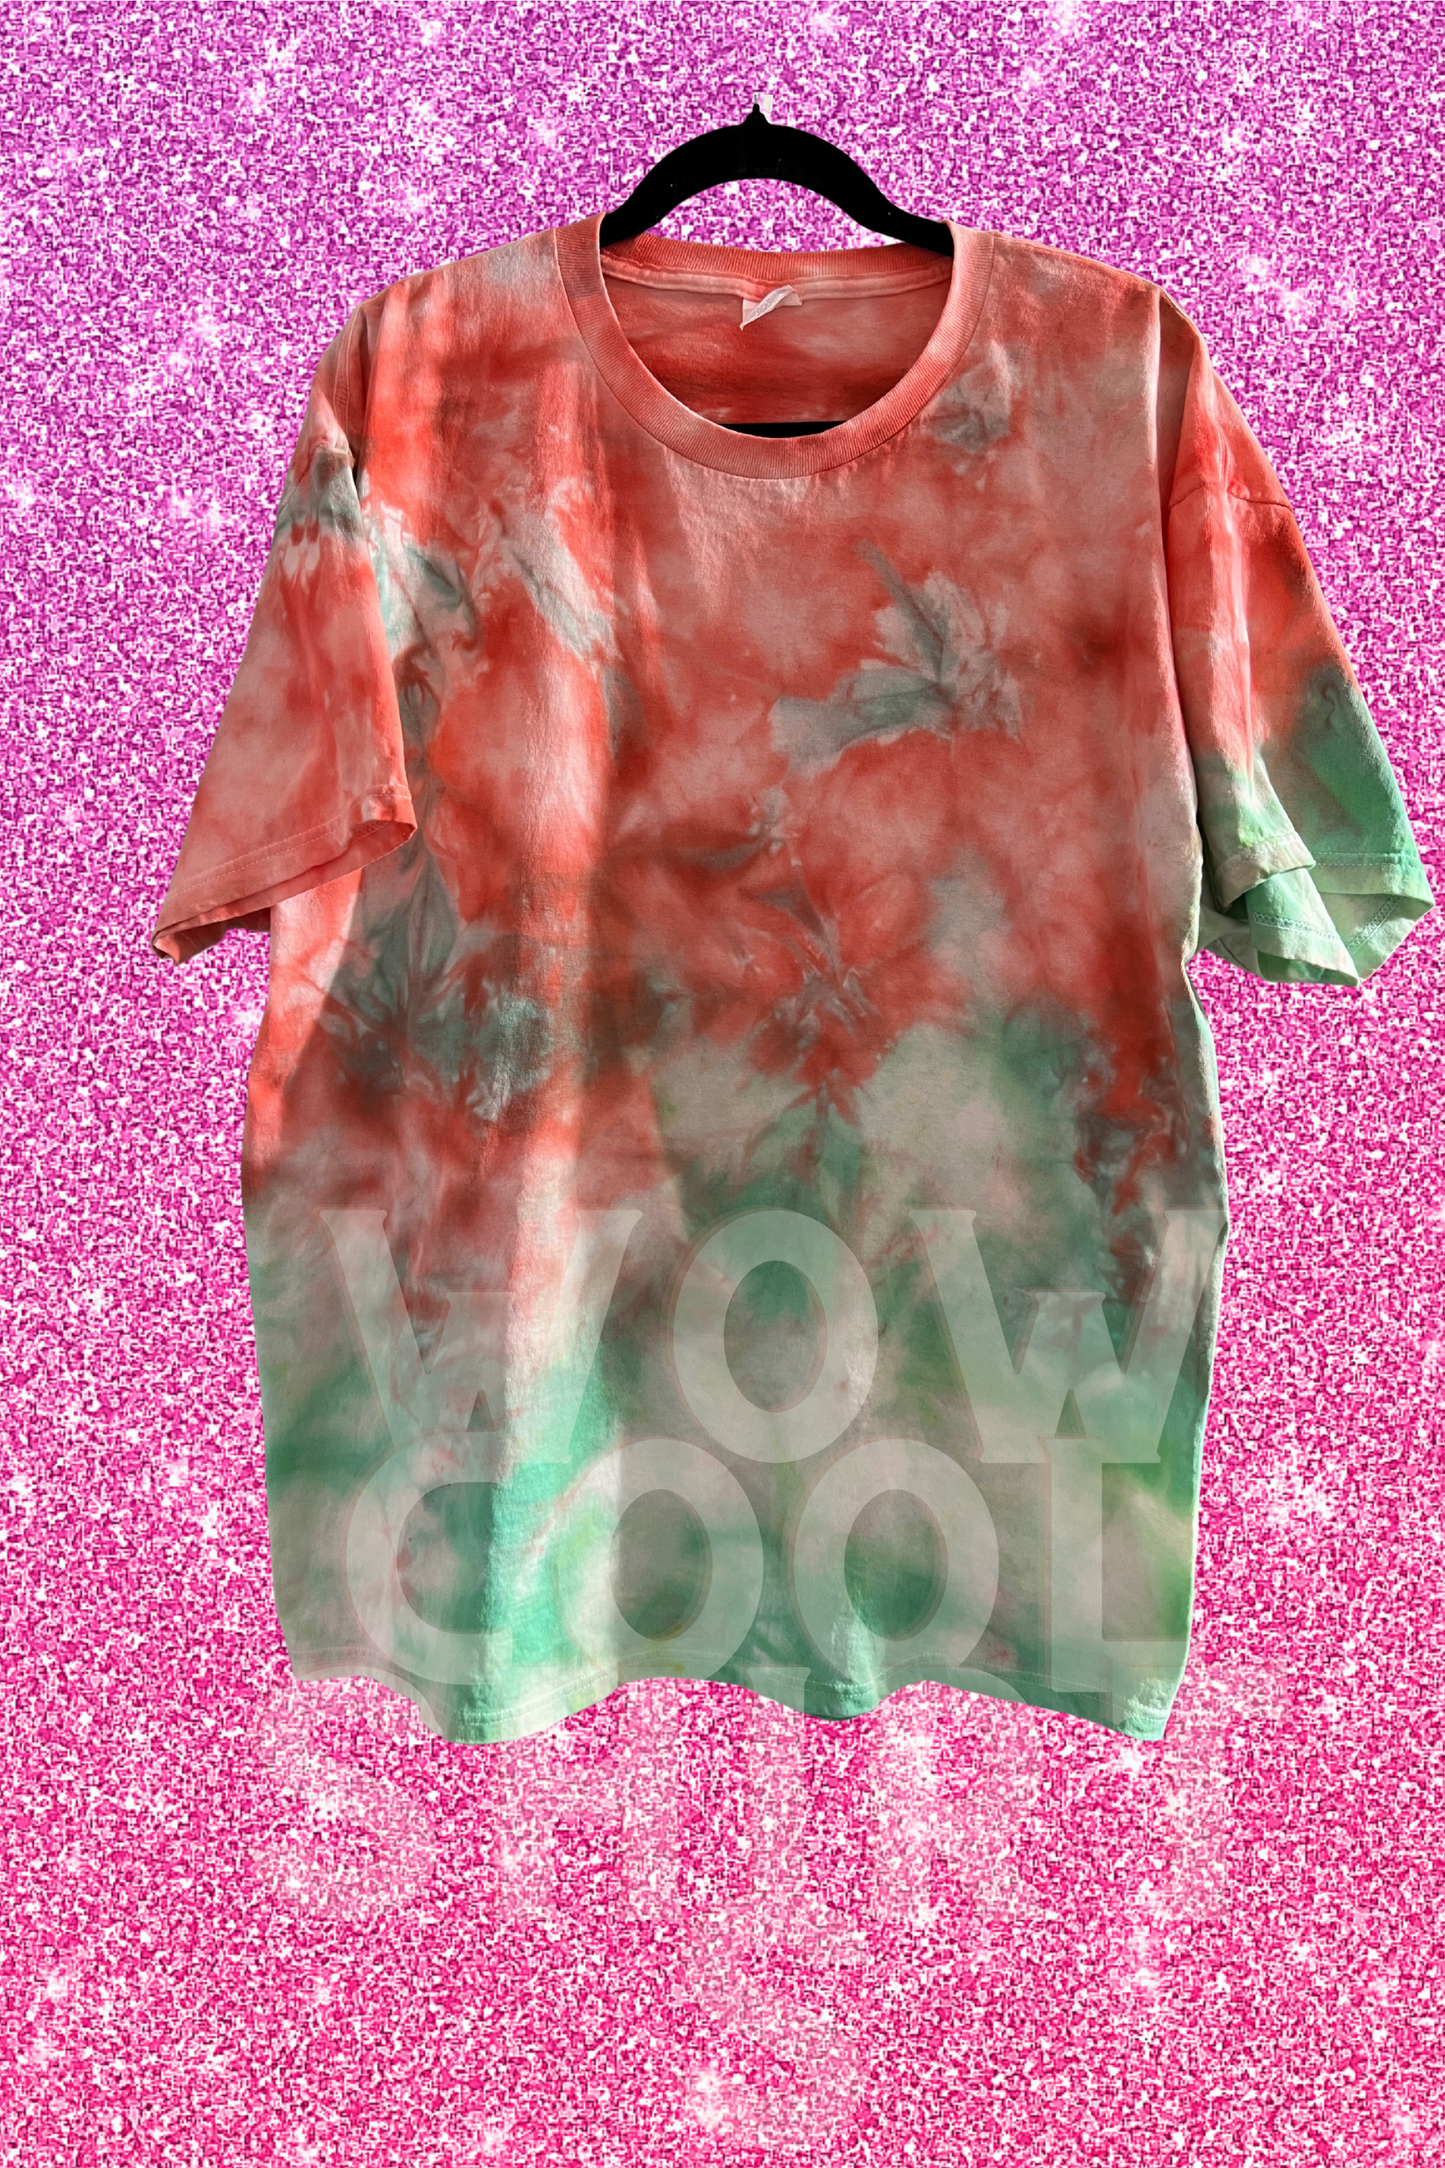 Red and Green ICE DYE T SHIRT AND SWEATSHIRT